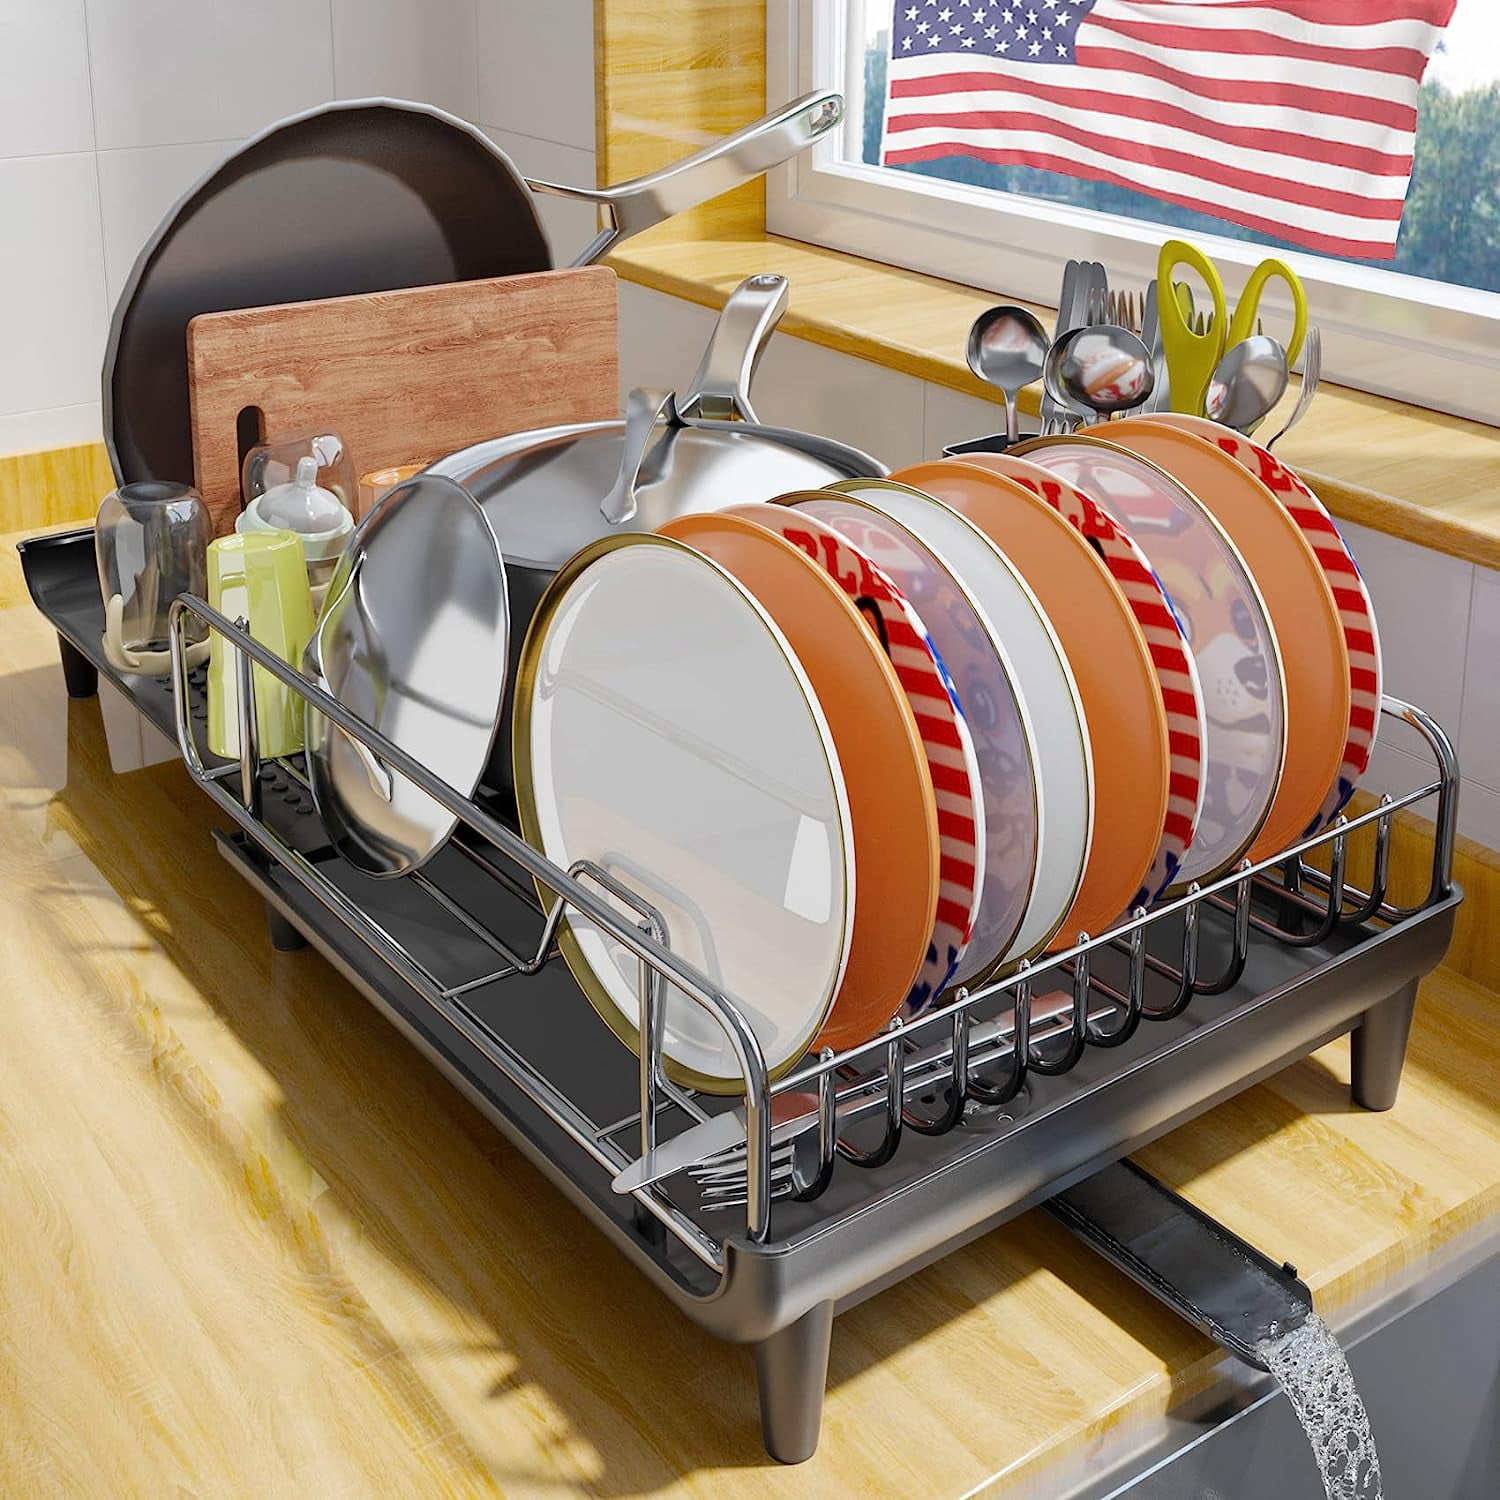 Dish Drying Rack 1 Pc Kitchen Sink Rack Stainless Steel Foldable Dish  Cutlery Drying Holder Fruits Cup Dish Tool – the best products in the Joom  Geek online store